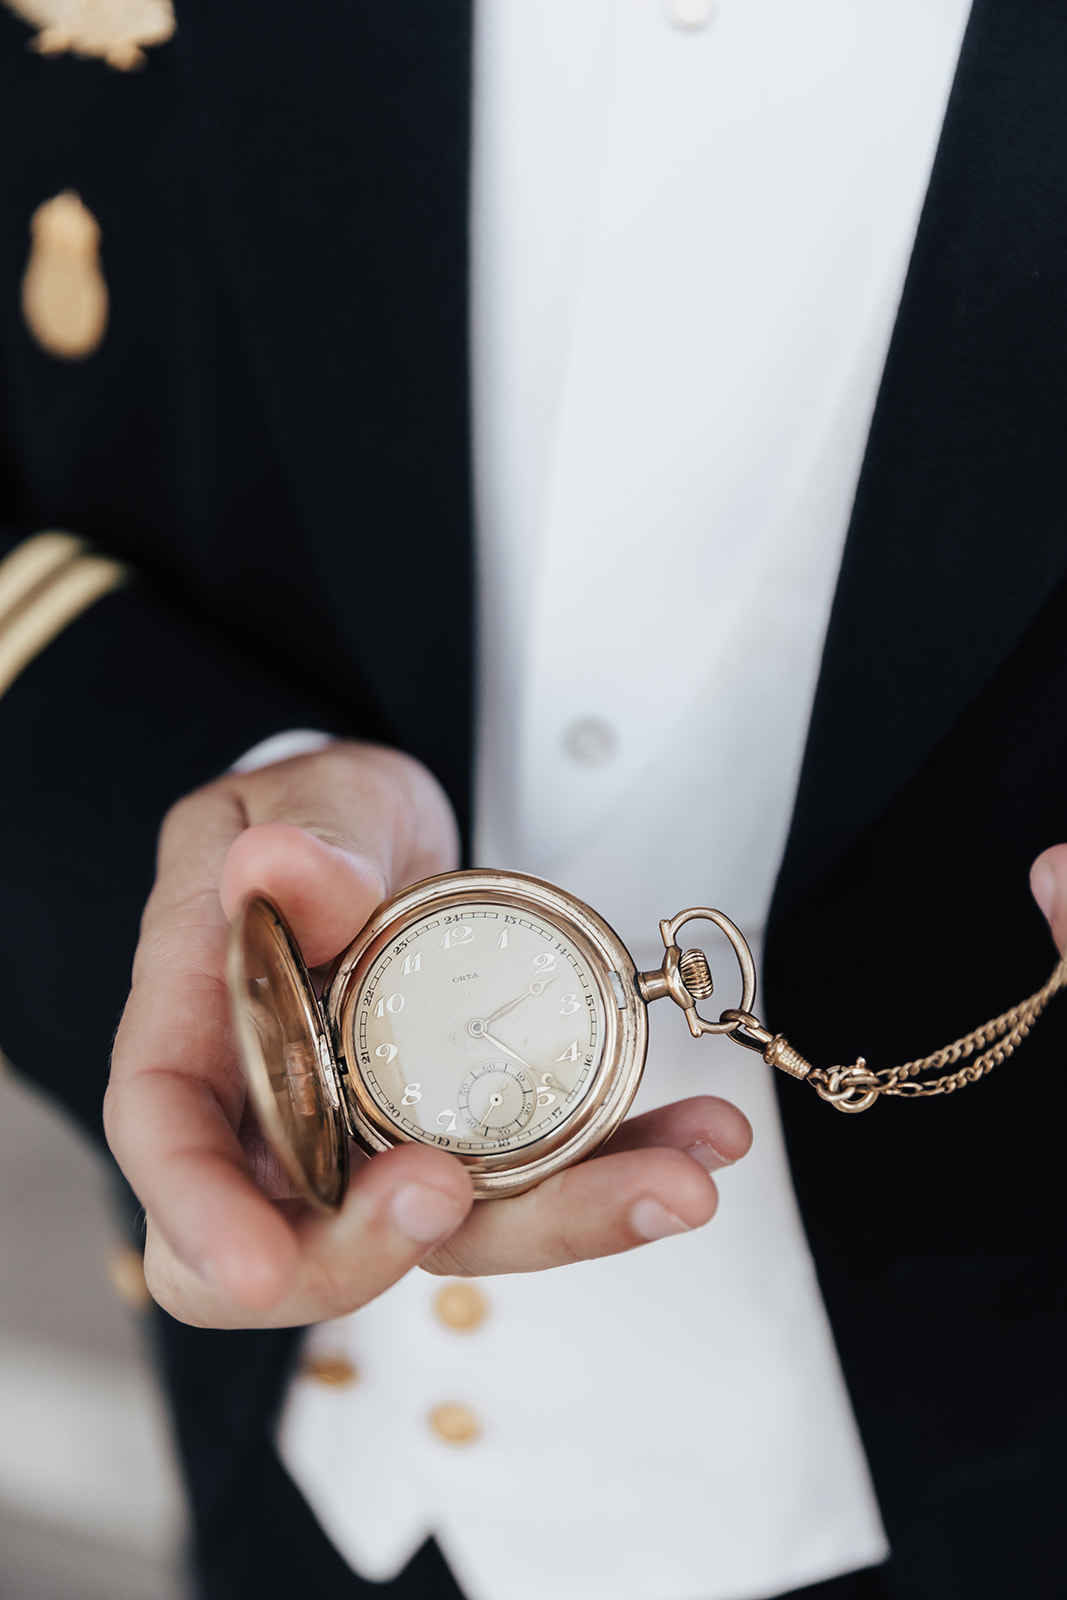 Man showing antique pocket watch into camera